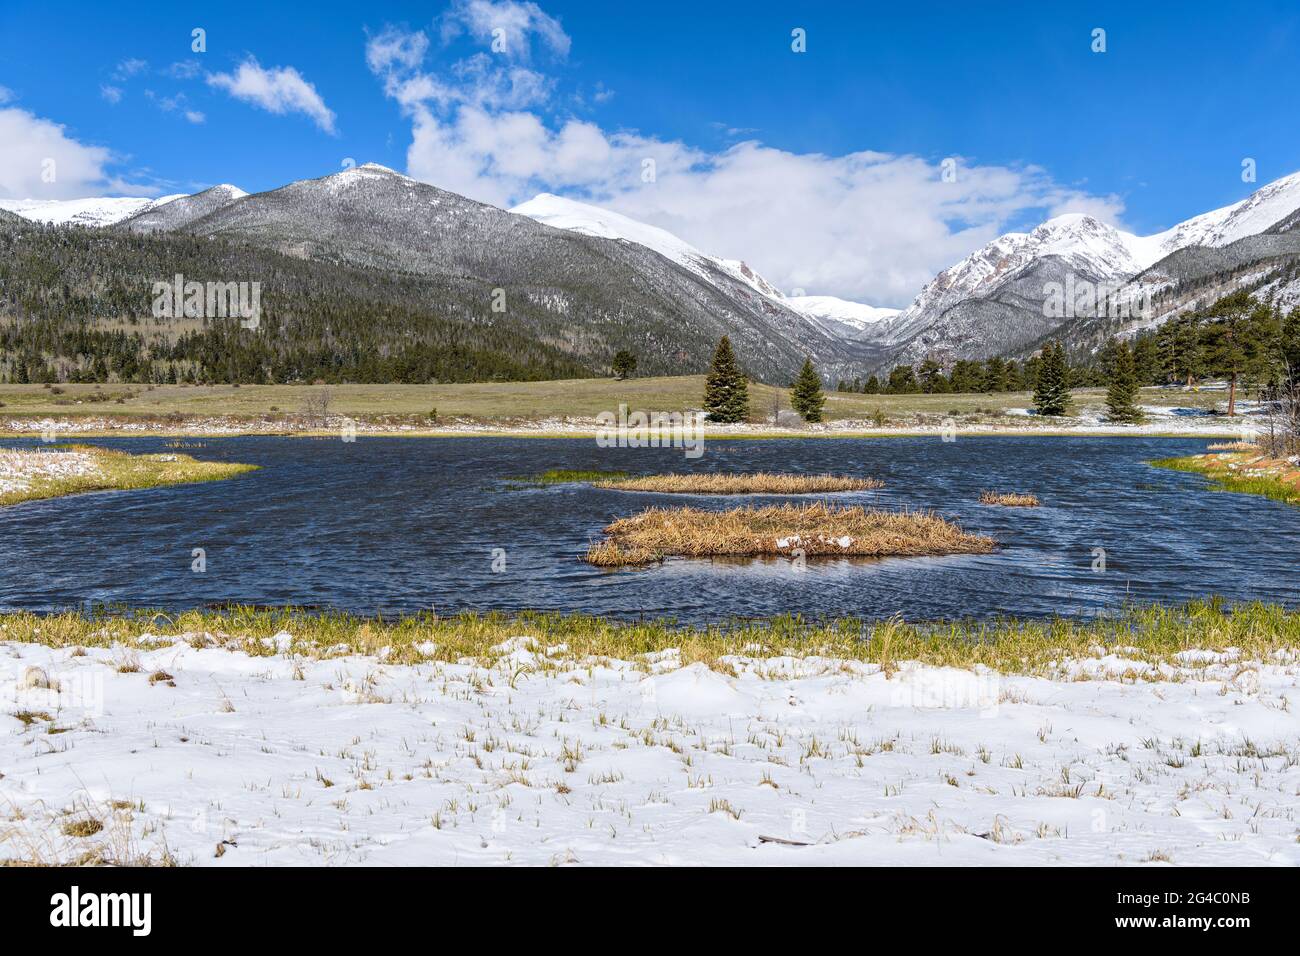 Sheep Lakes - A Spring morning view of Sheep Lakes after an overnight snow storm. Rocky Mountain National Park, Colorado, USA. Stock Photo